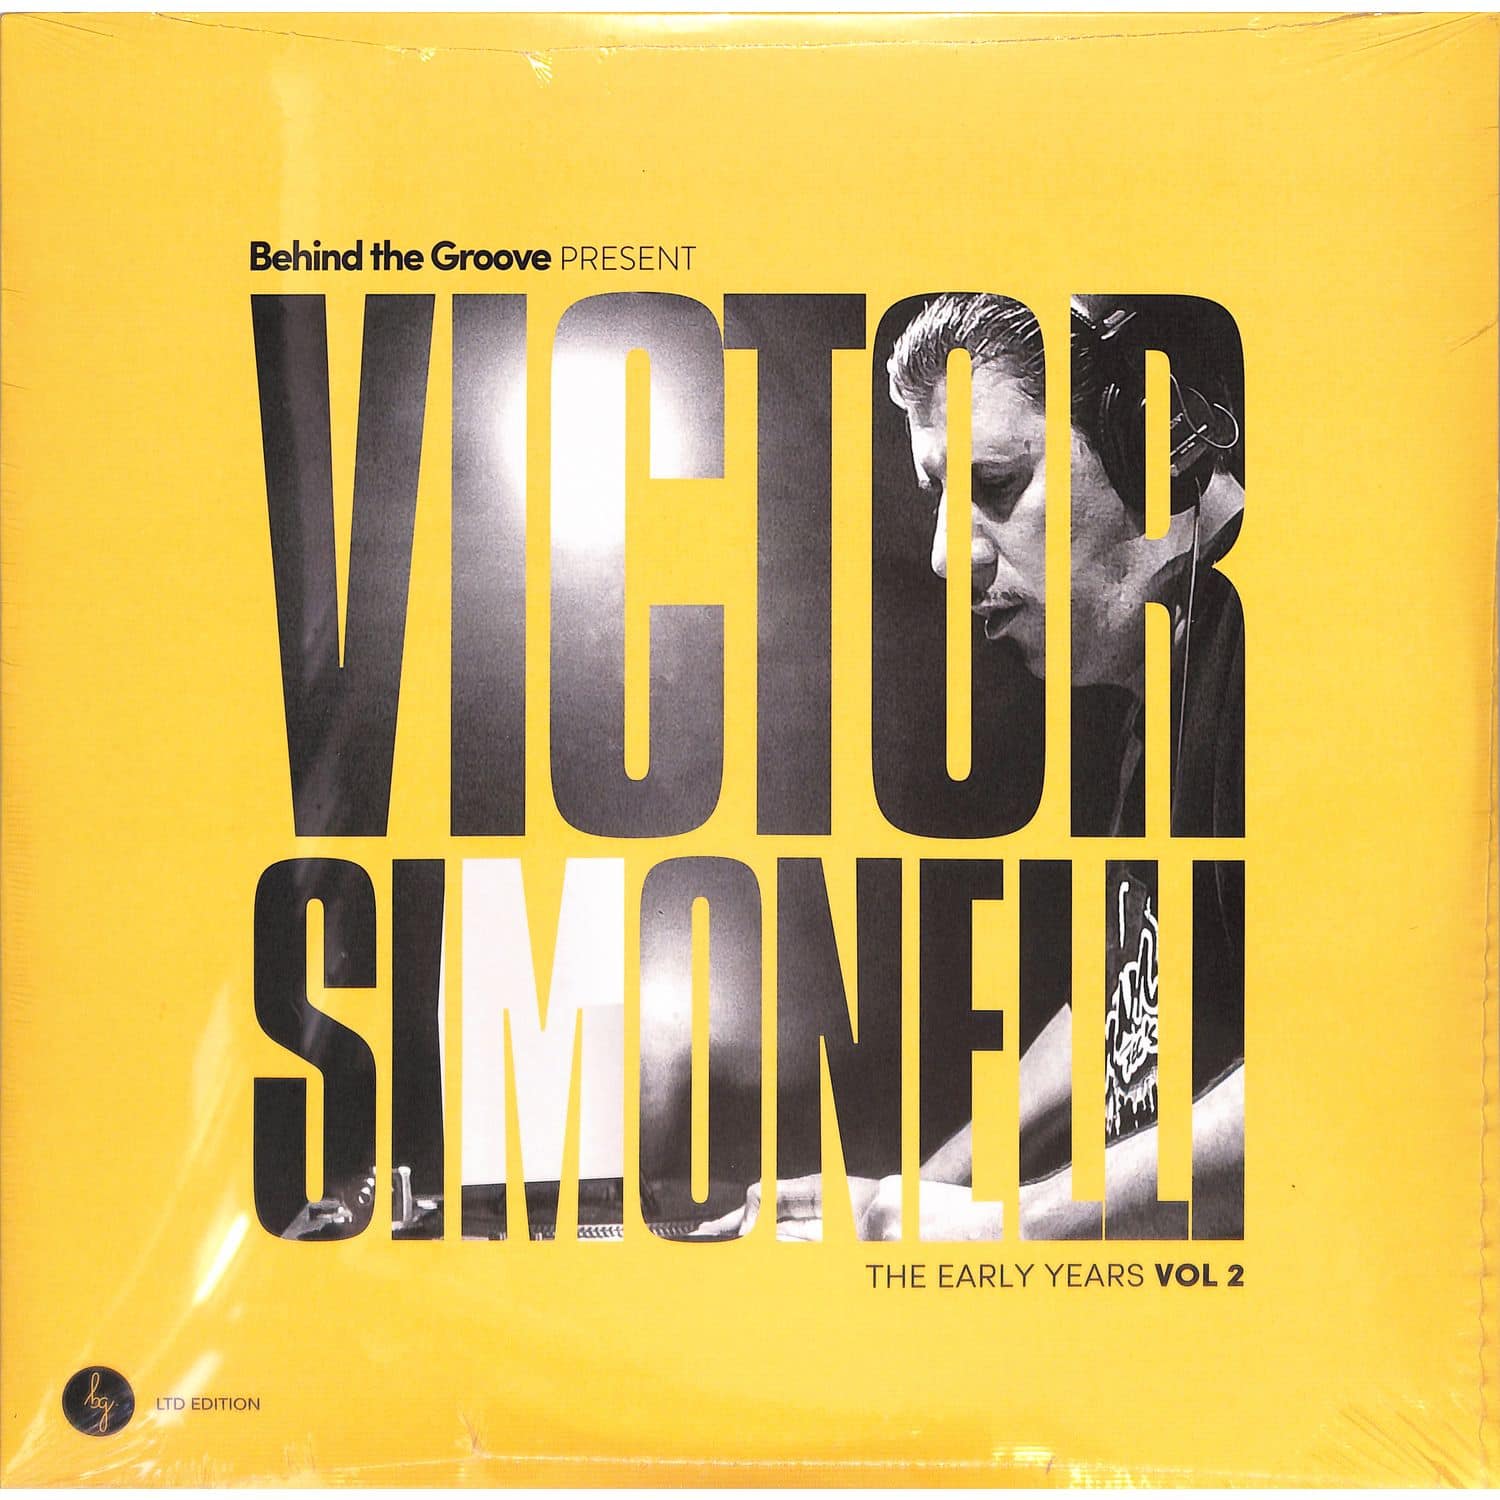 Victor Simonelli - BEHIND THE GROOVE PRESENT VICTOR SIMONELLI THE EARLY YEARS VOL 2 